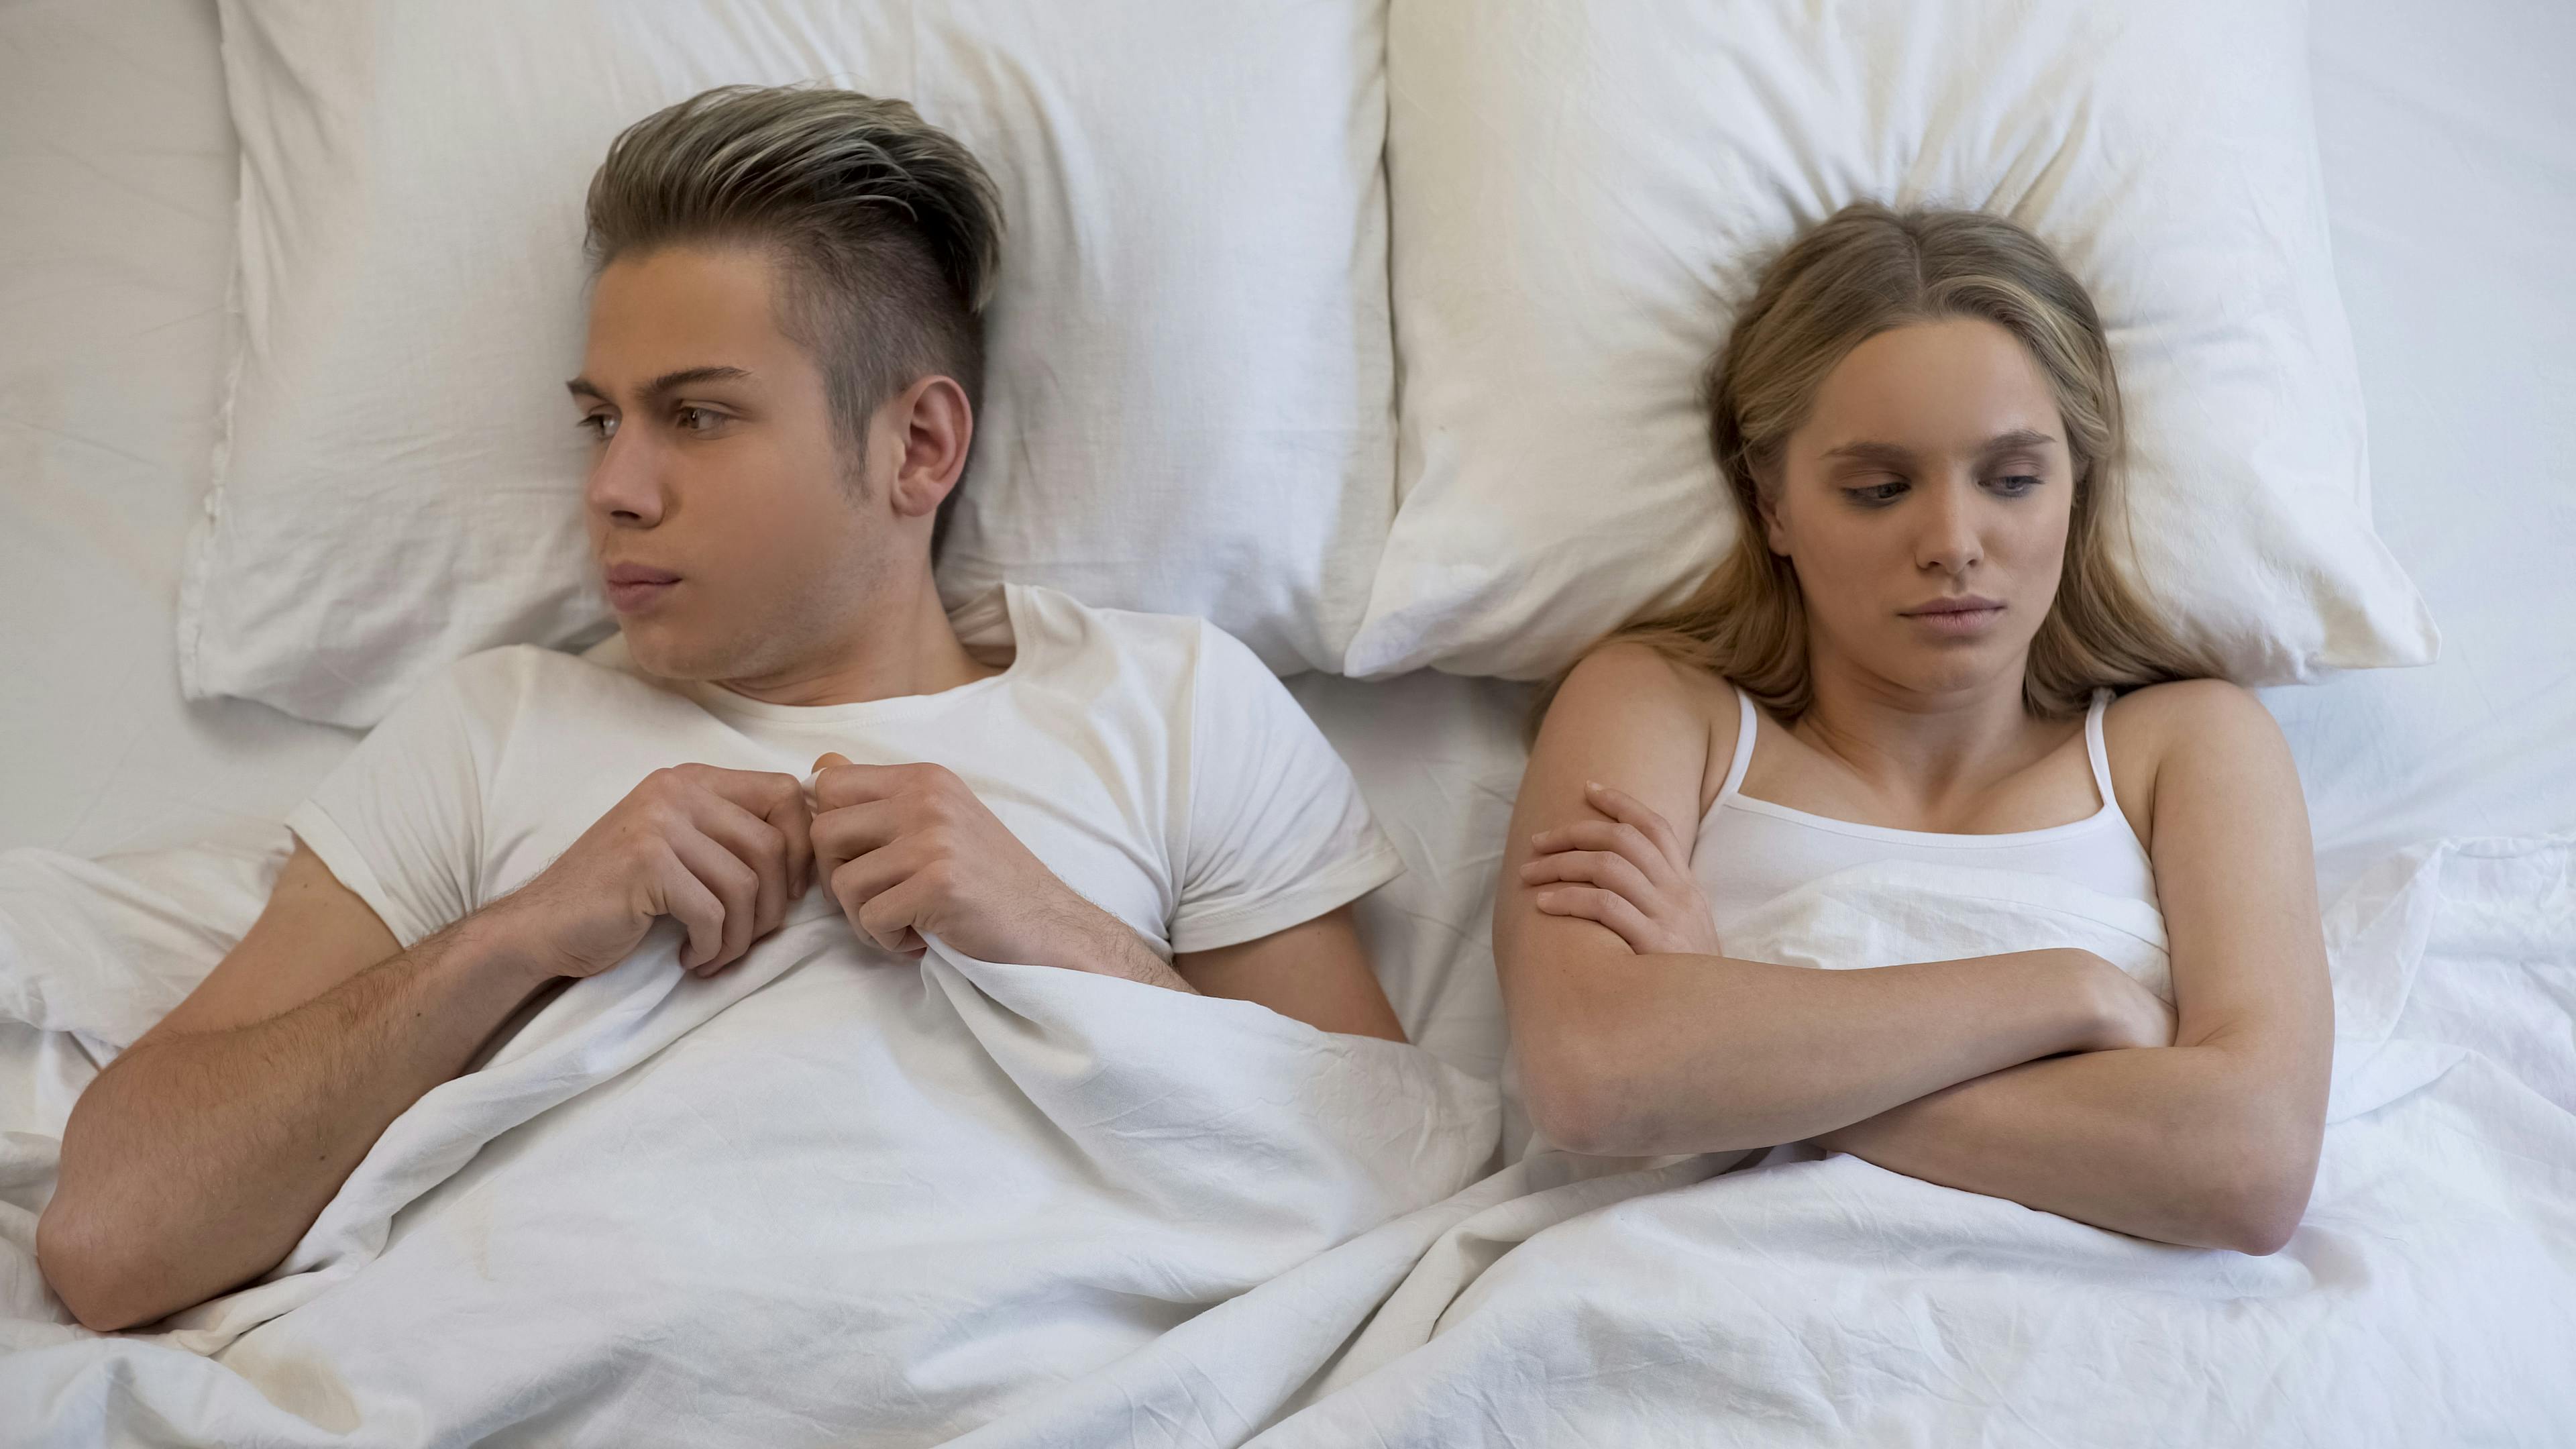 Young wife looking dissatisfied with first sex experience, embarrassed boyfriend